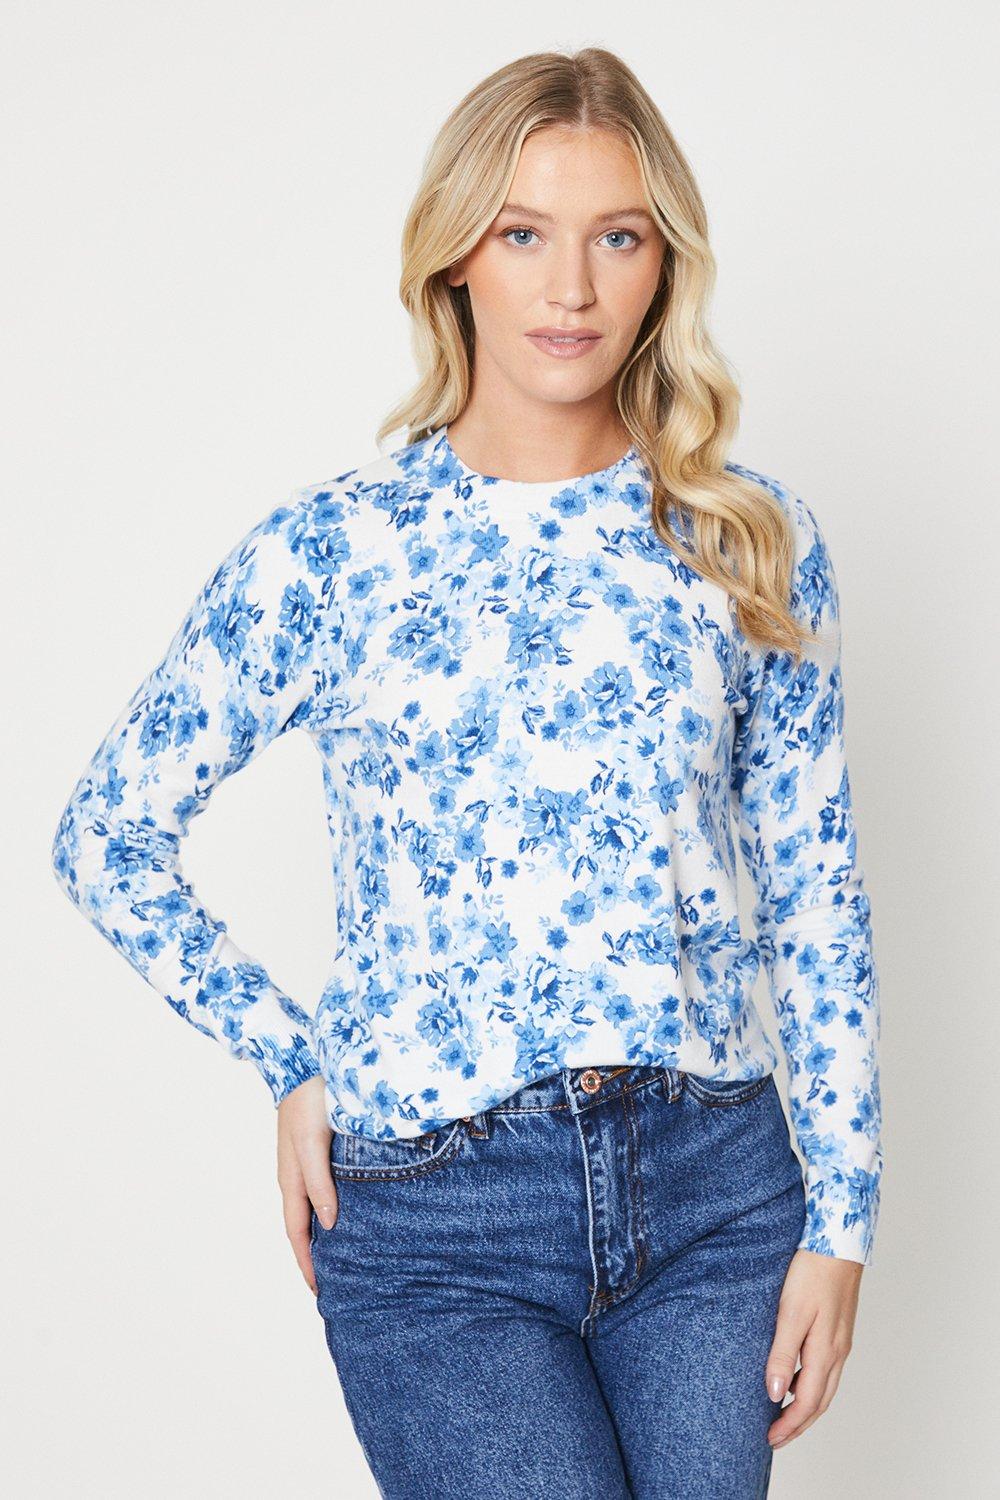 Women’s Floral Printed Soft Knit Jumper - S